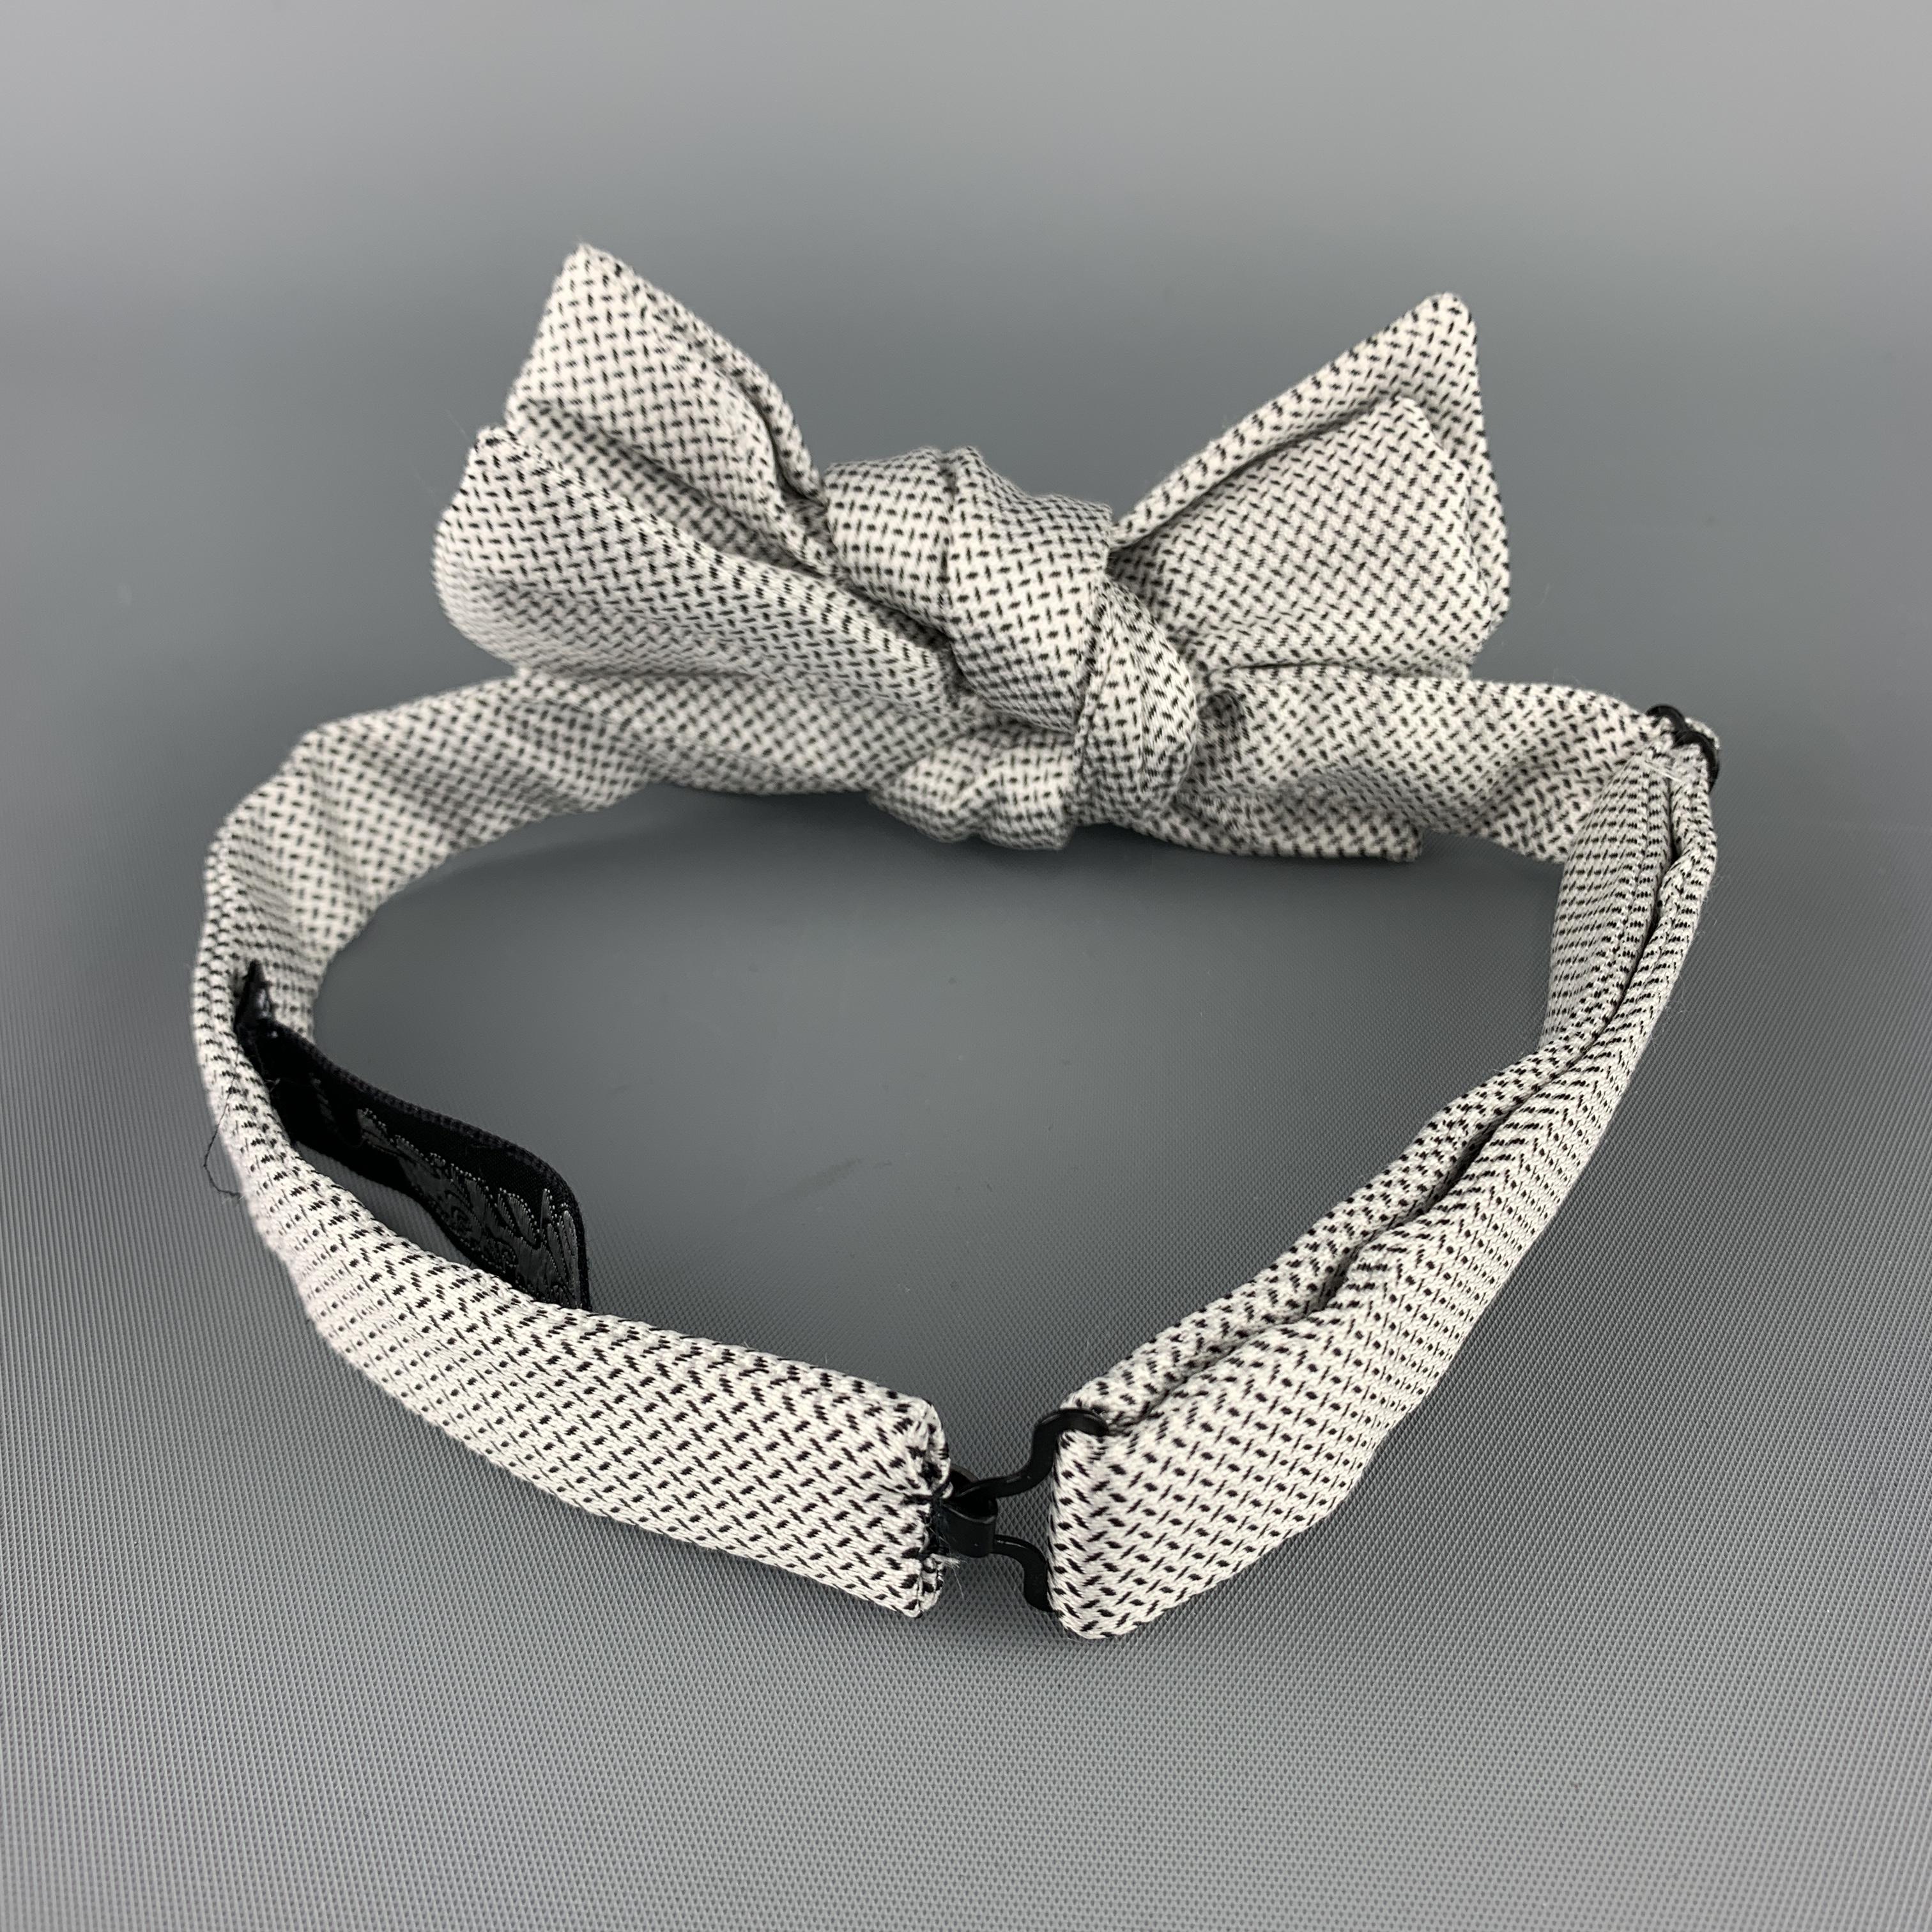 CHARVET bow tie comes in black and white print silk with an adjustable neck. Made in France.

Excellent Pre-Owned Condition. 

Original Retail Price: $250.00